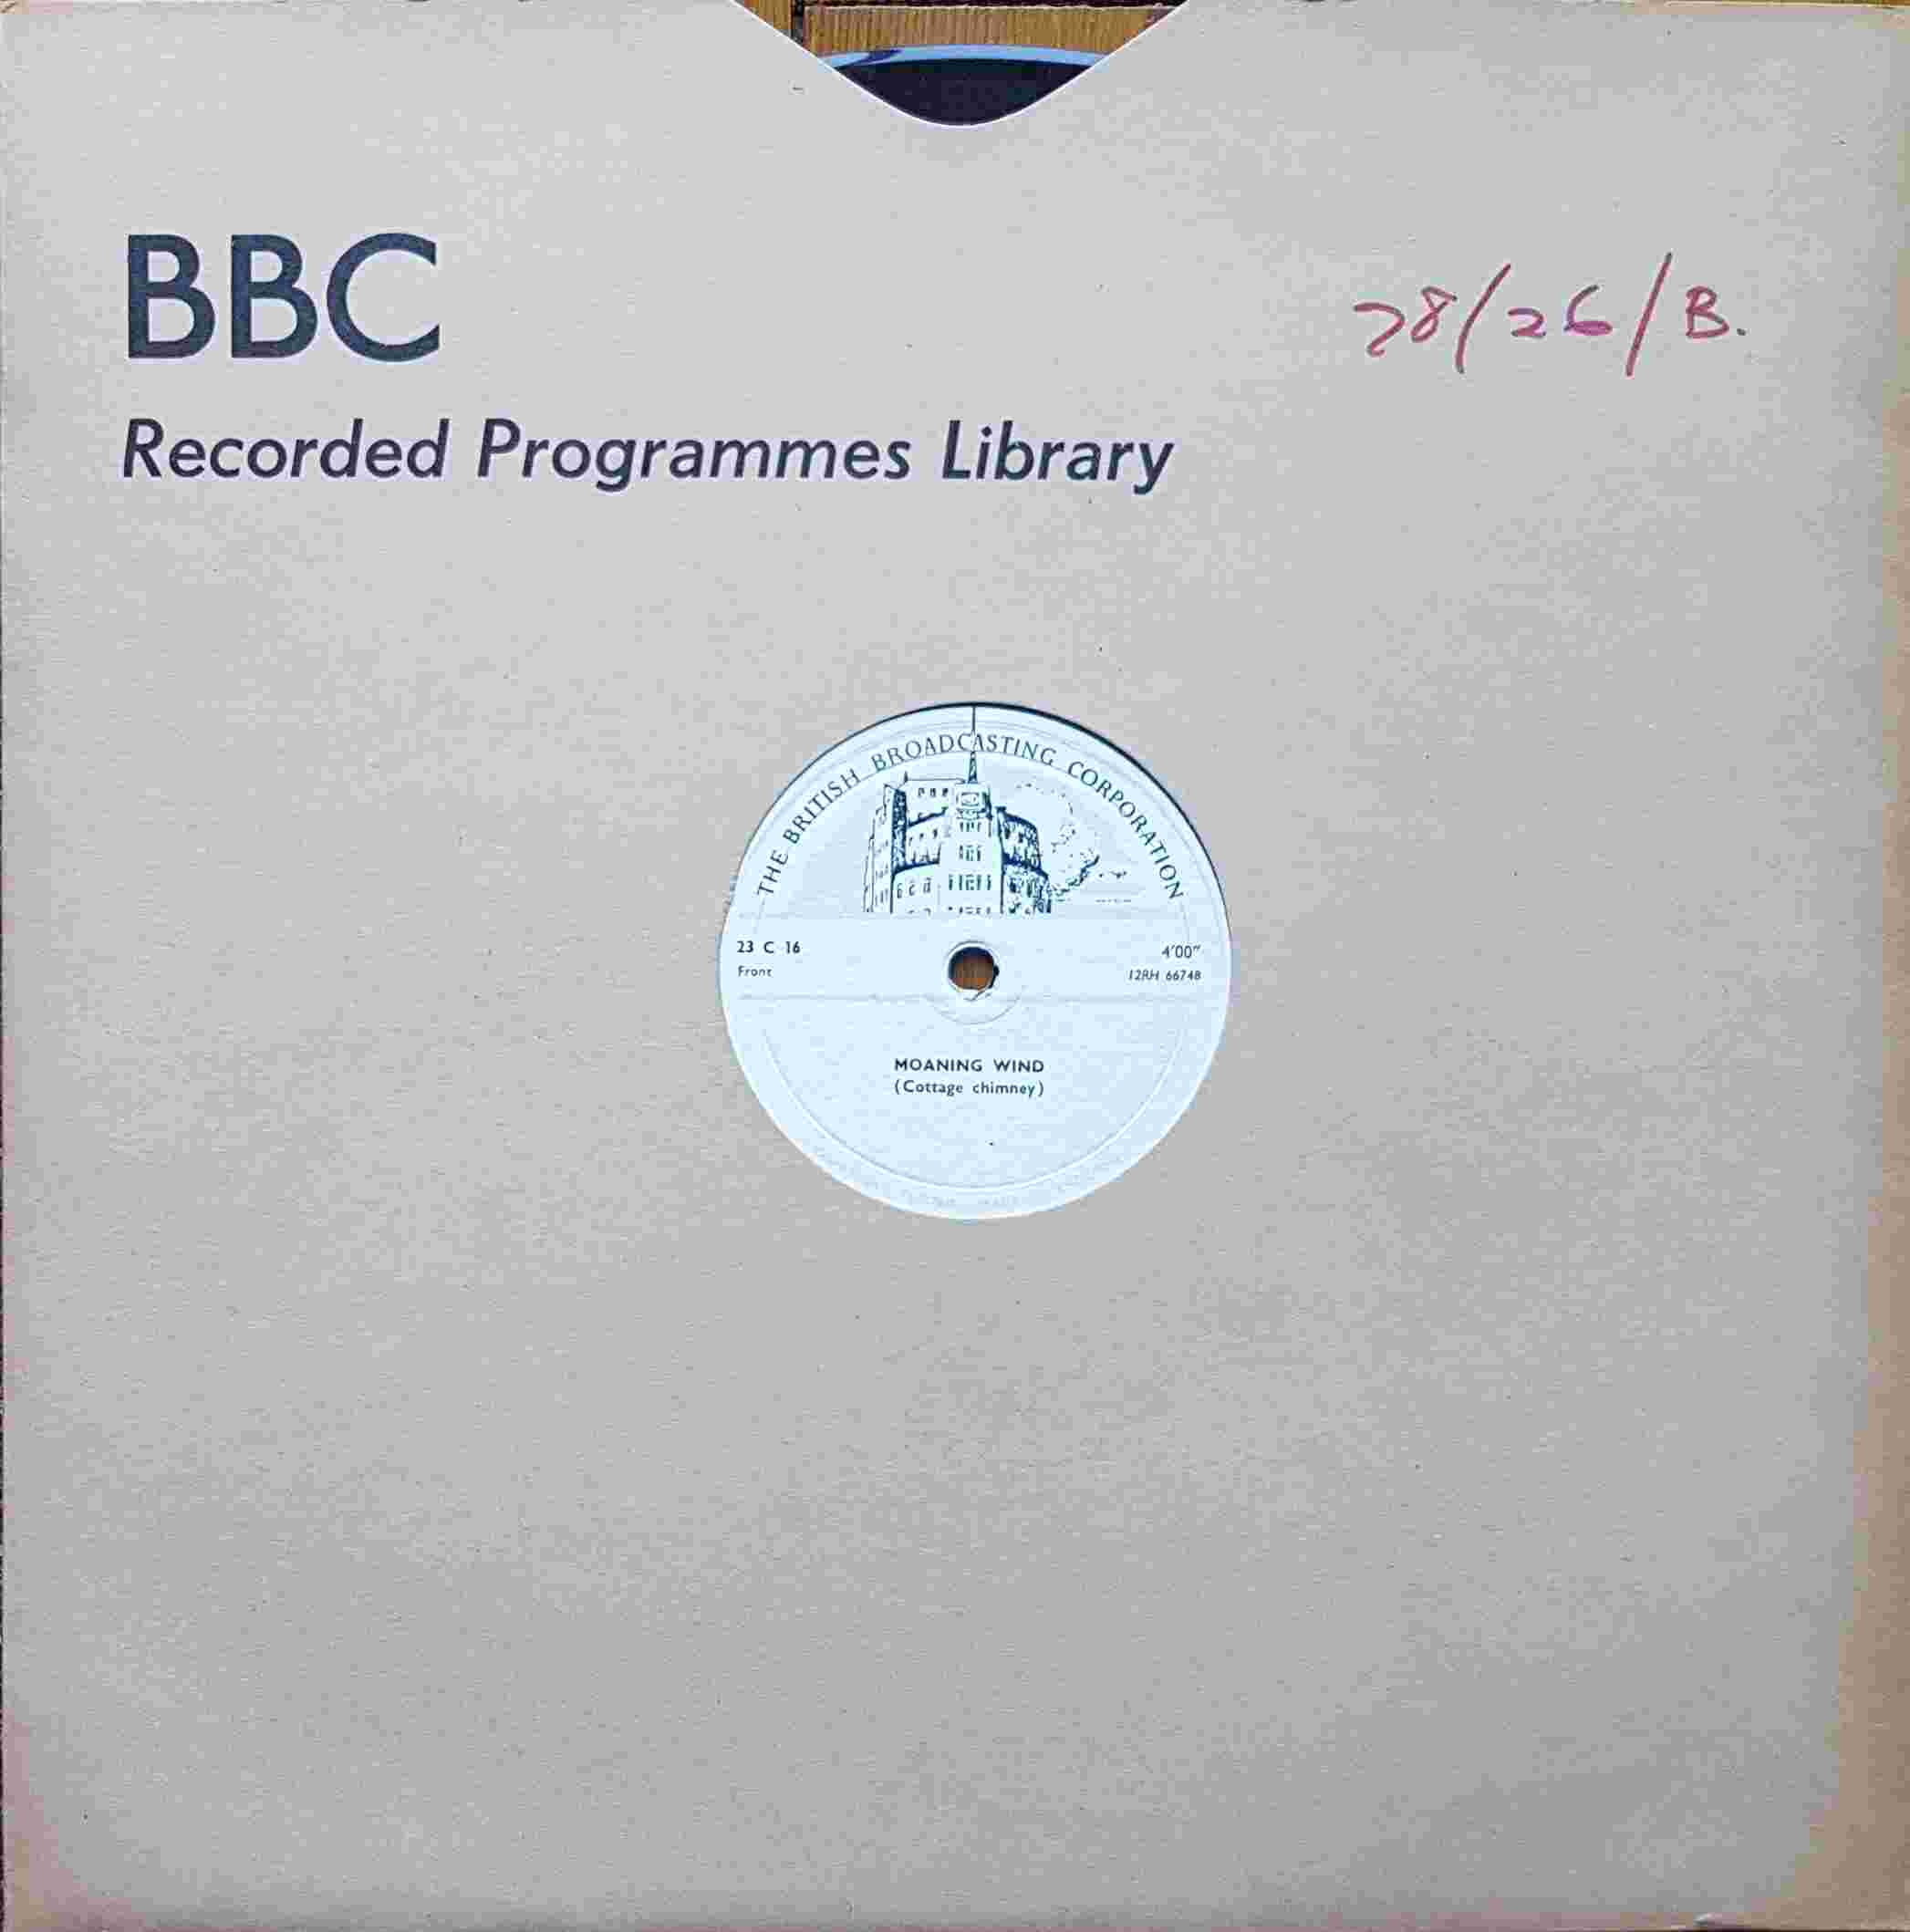 Picture of 23 C 16 Wind by artist Not registered from the BBC records and Tapes library